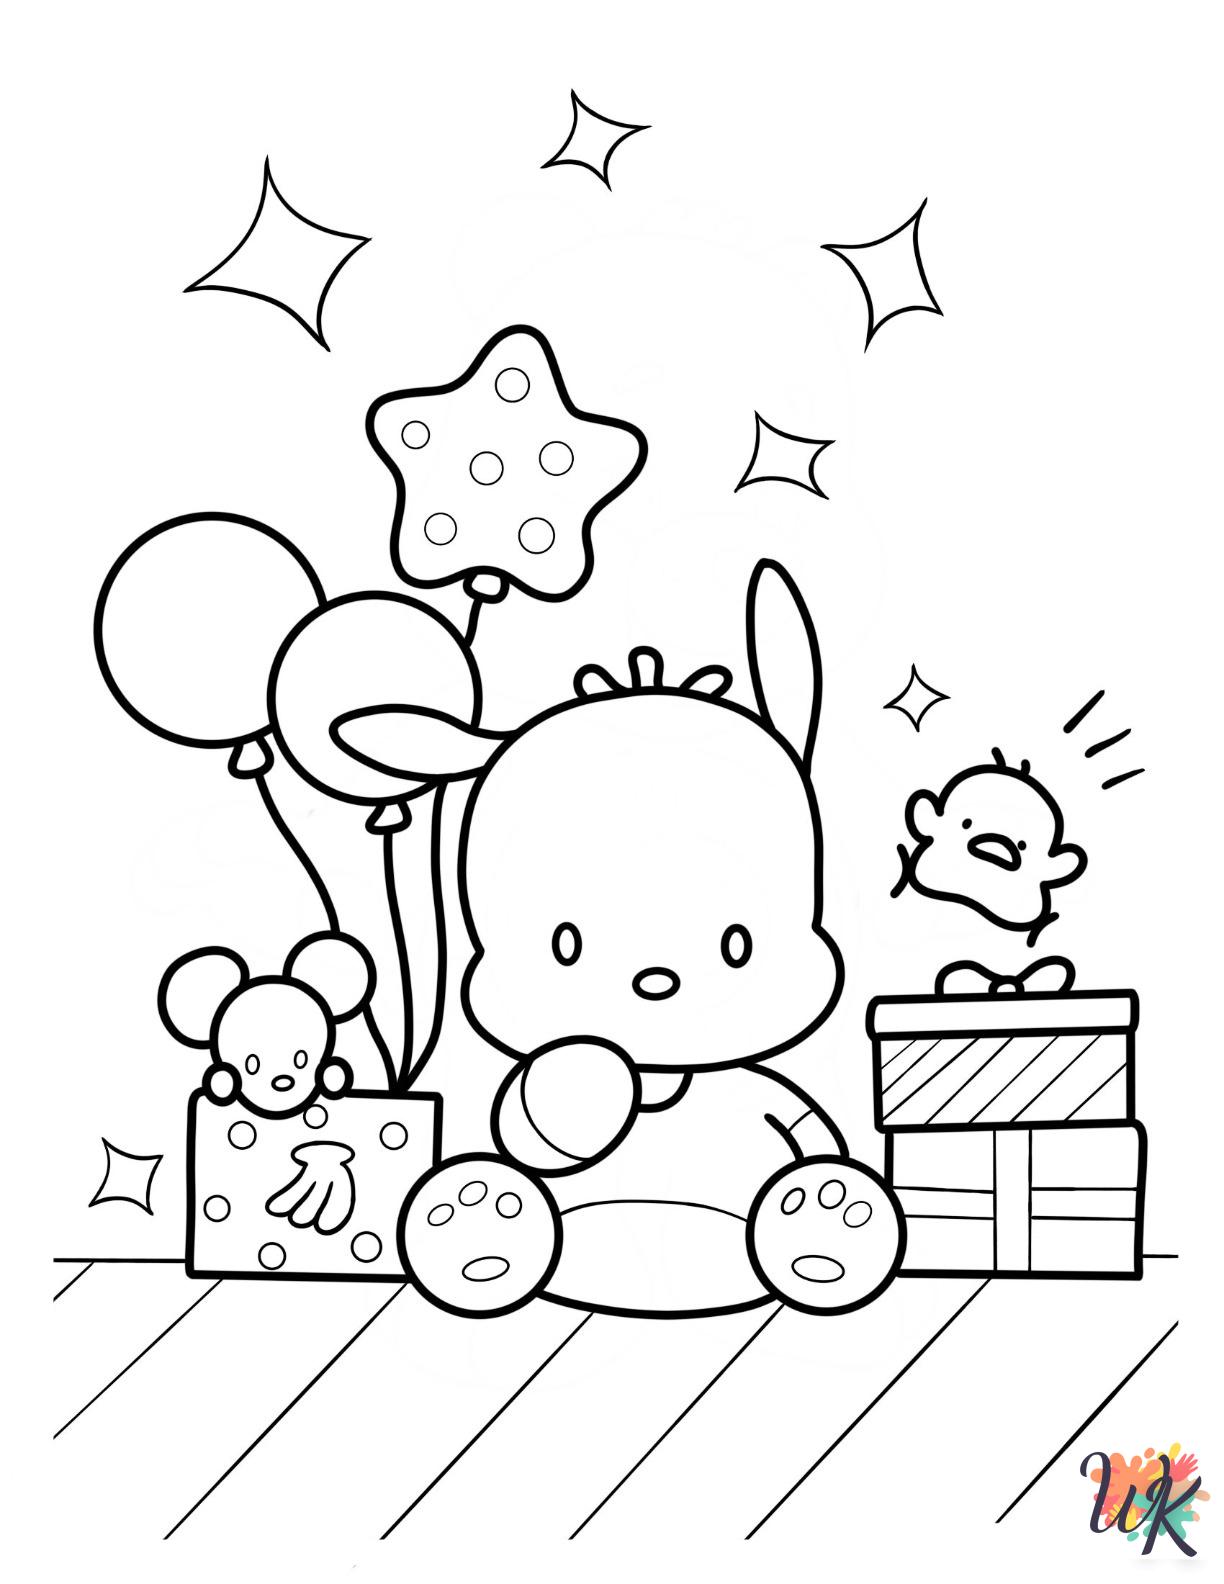 Pochacco coloring pages for adults pdf 1